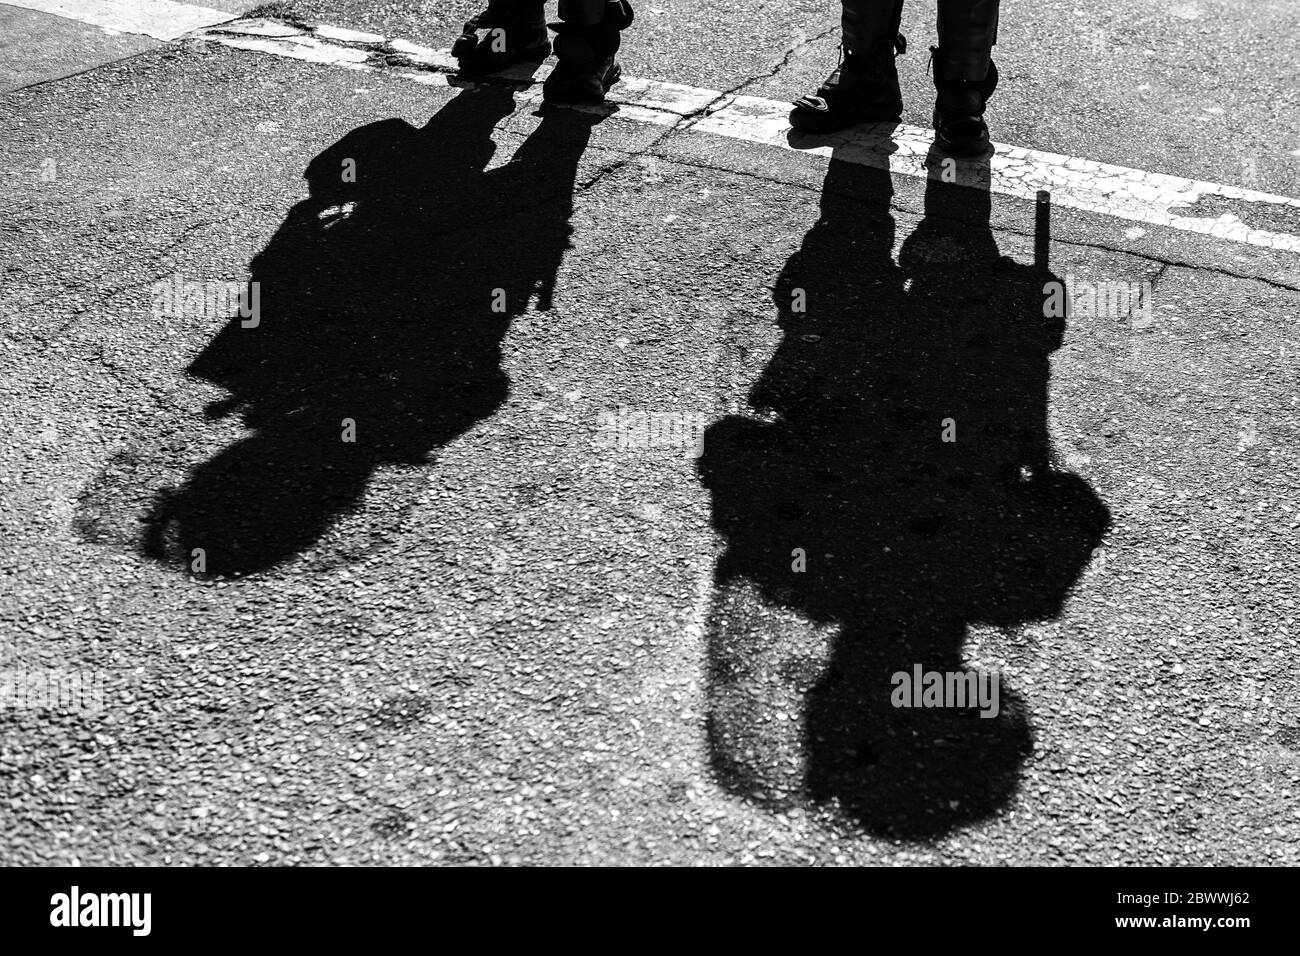 Oakland, Ca. 2nd June, 2020. Police Officers cast shadows near the Oakland Police Department in Oakland, California on June 2, 2020 after the death of George Floyd. Credit: Chris Tuite/Image Space/Media Punch/Alamy Live News Stock Photo